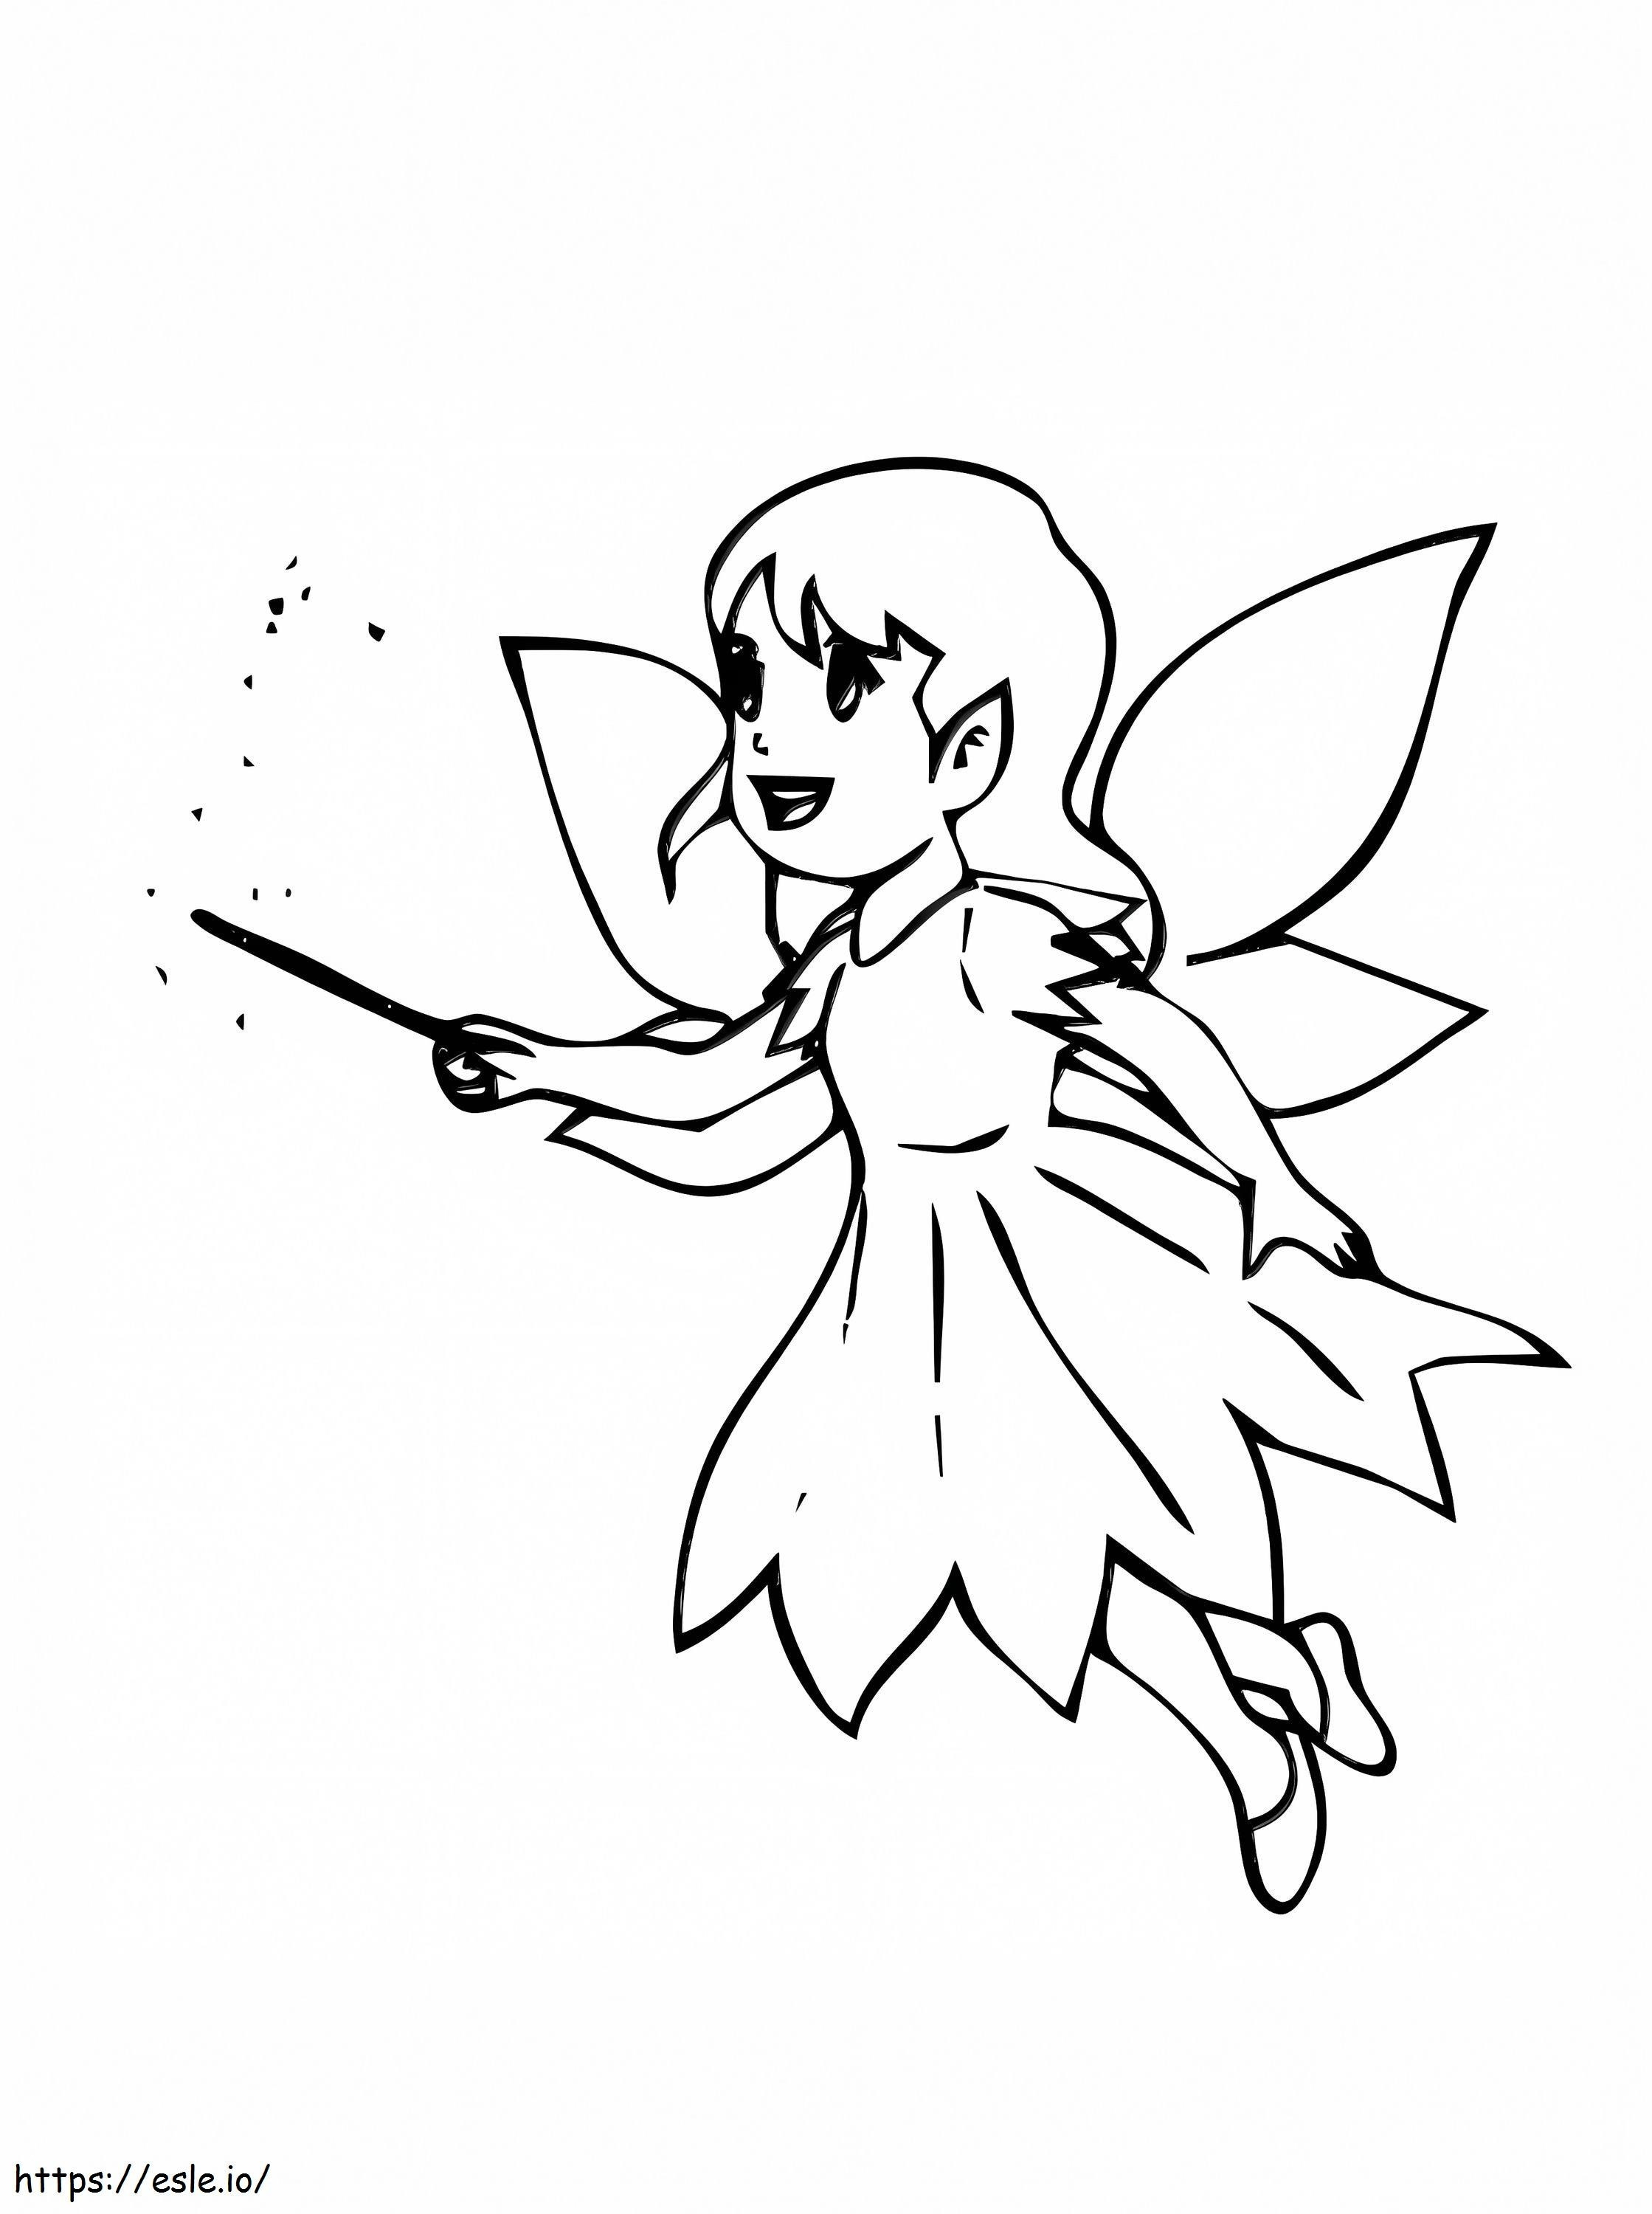 Petite Fee coloring page